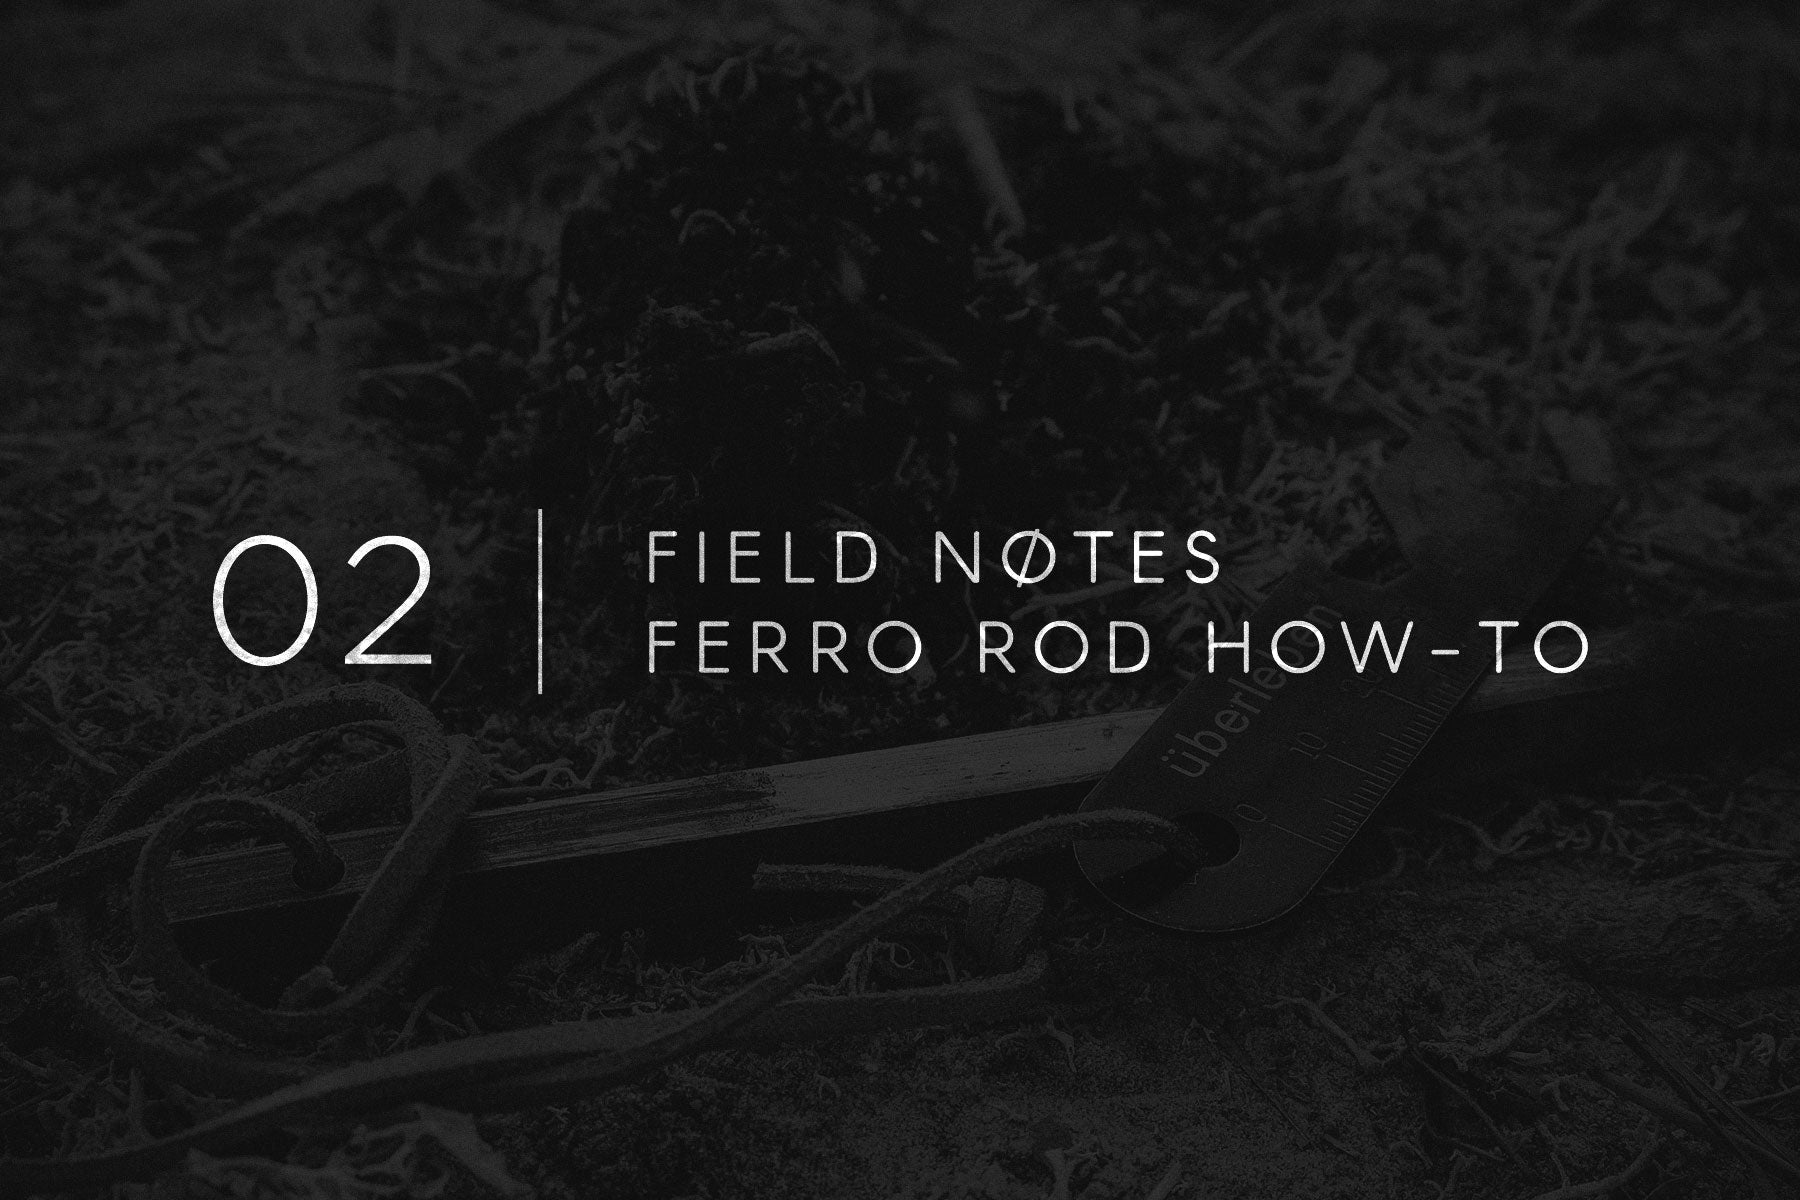 Field Notes 02 - How To Use A Ferro Rod